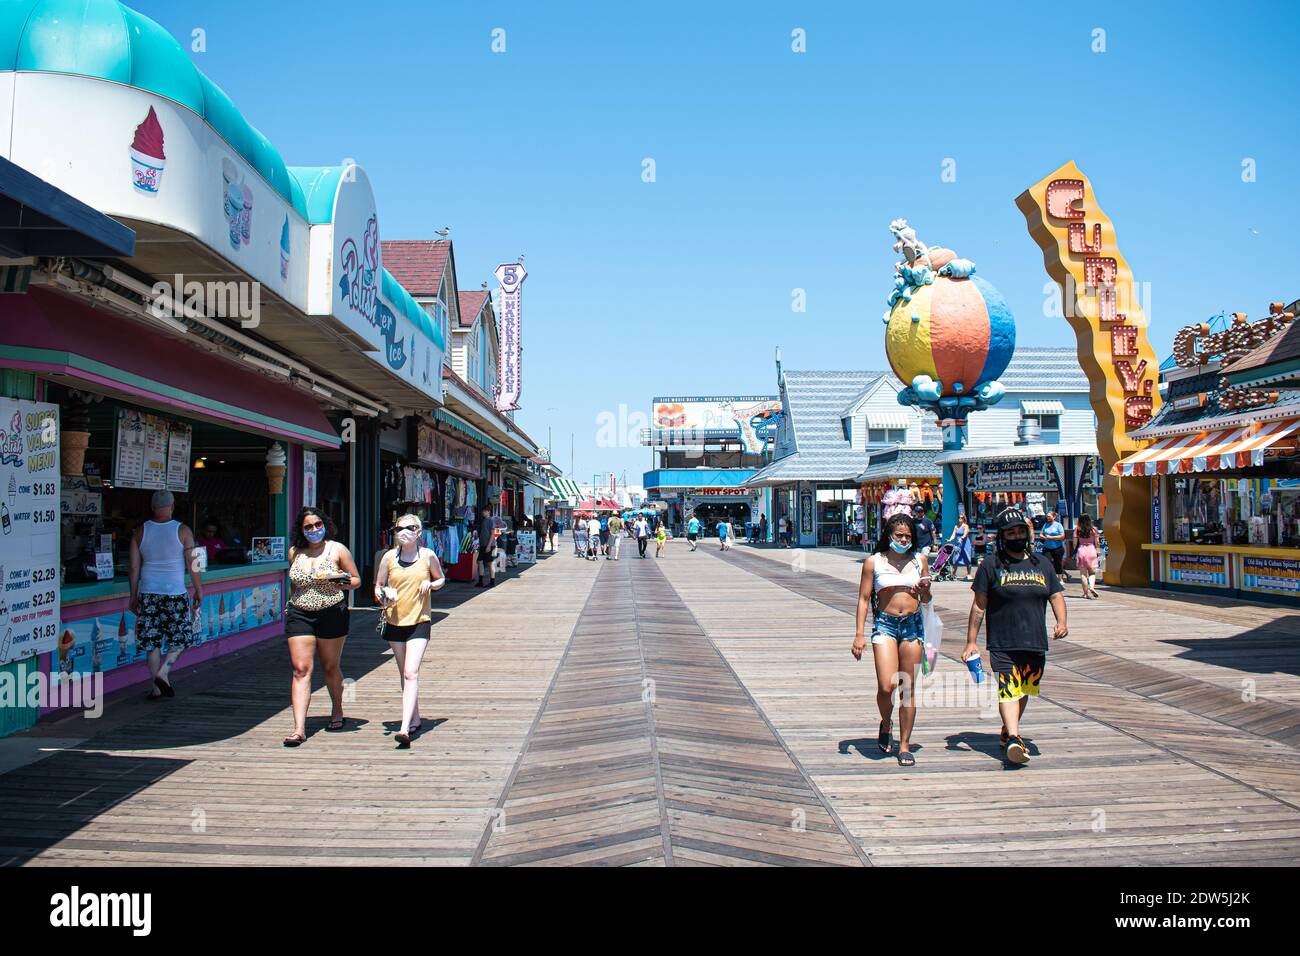 A sunny Day on The Wildwood NJ Boardwalk With People Enjoying Their Day